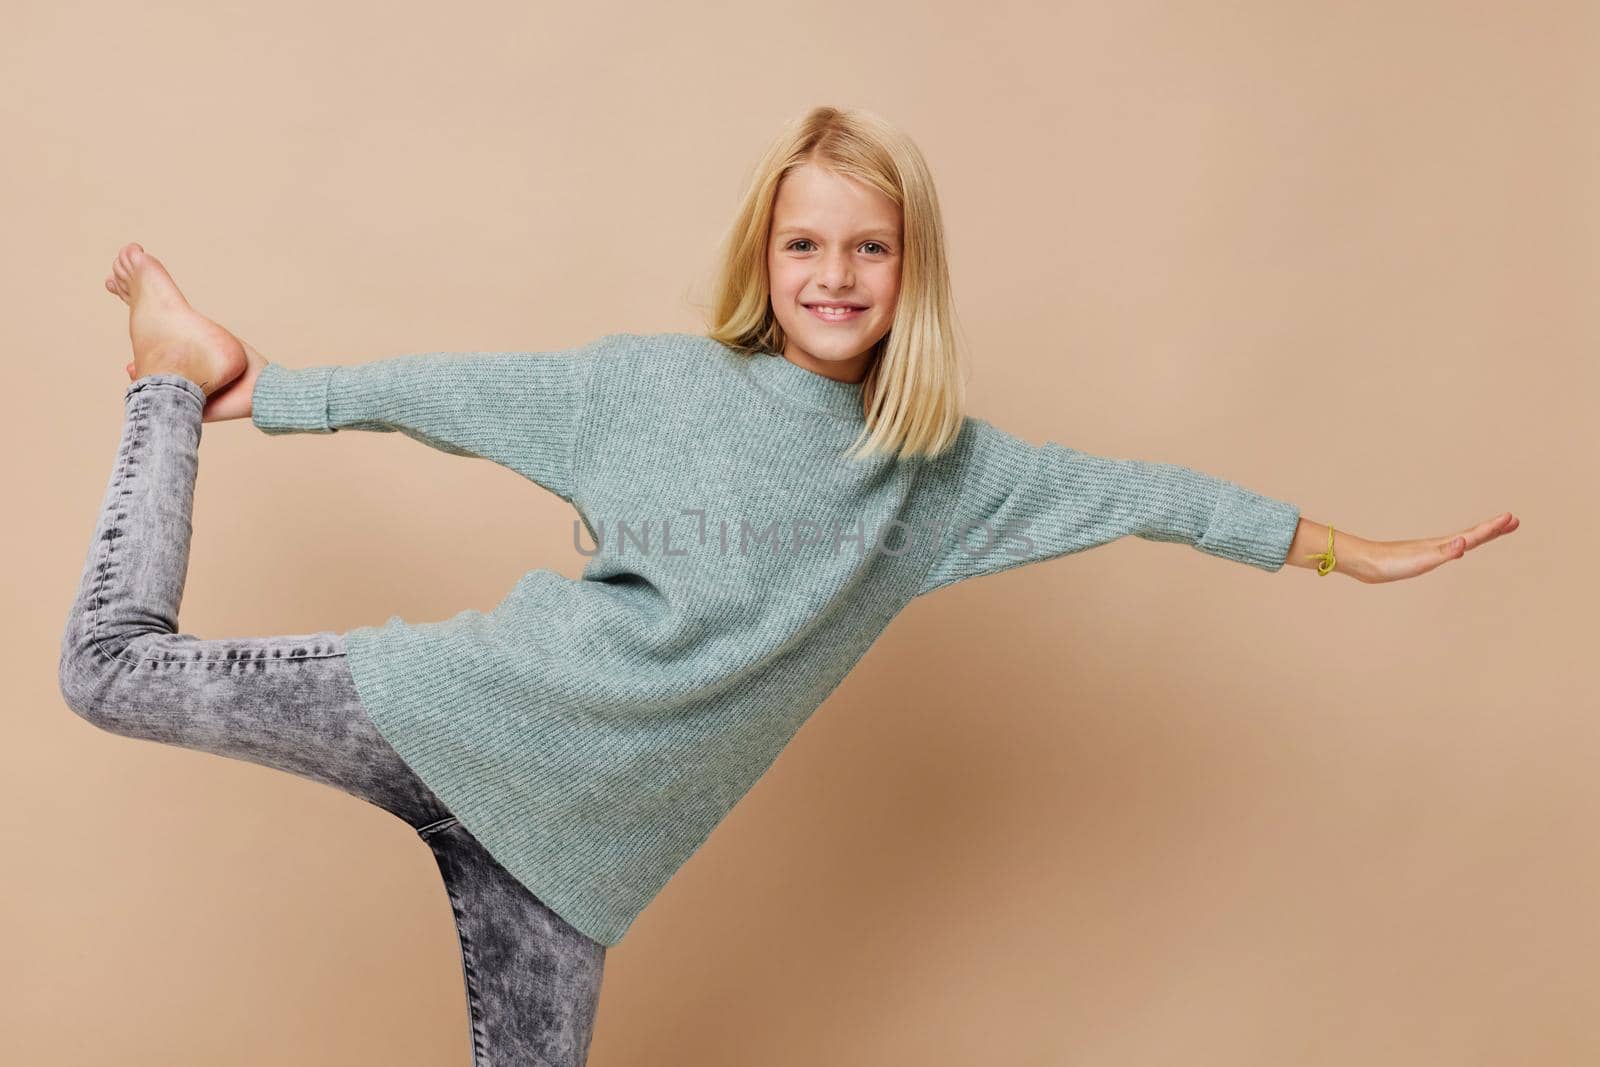 Little cute girl in a sweater, grimaces kids lifestyle concept. High quality photo